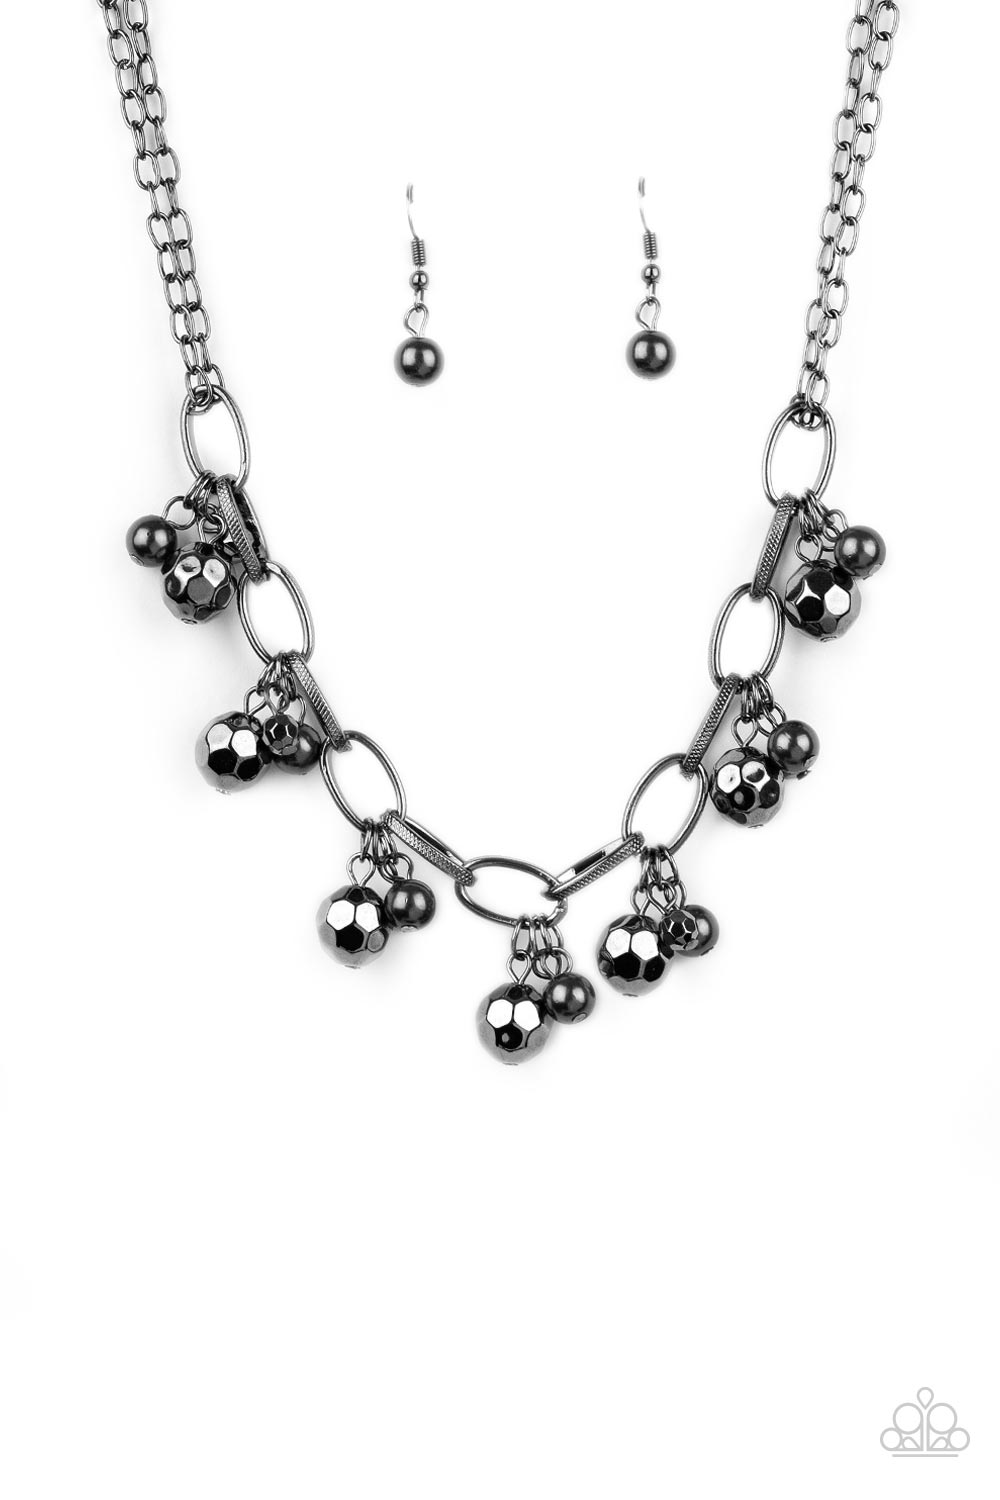 Malibu Movement Paparazzi Accessories Necklace with Earrings Black